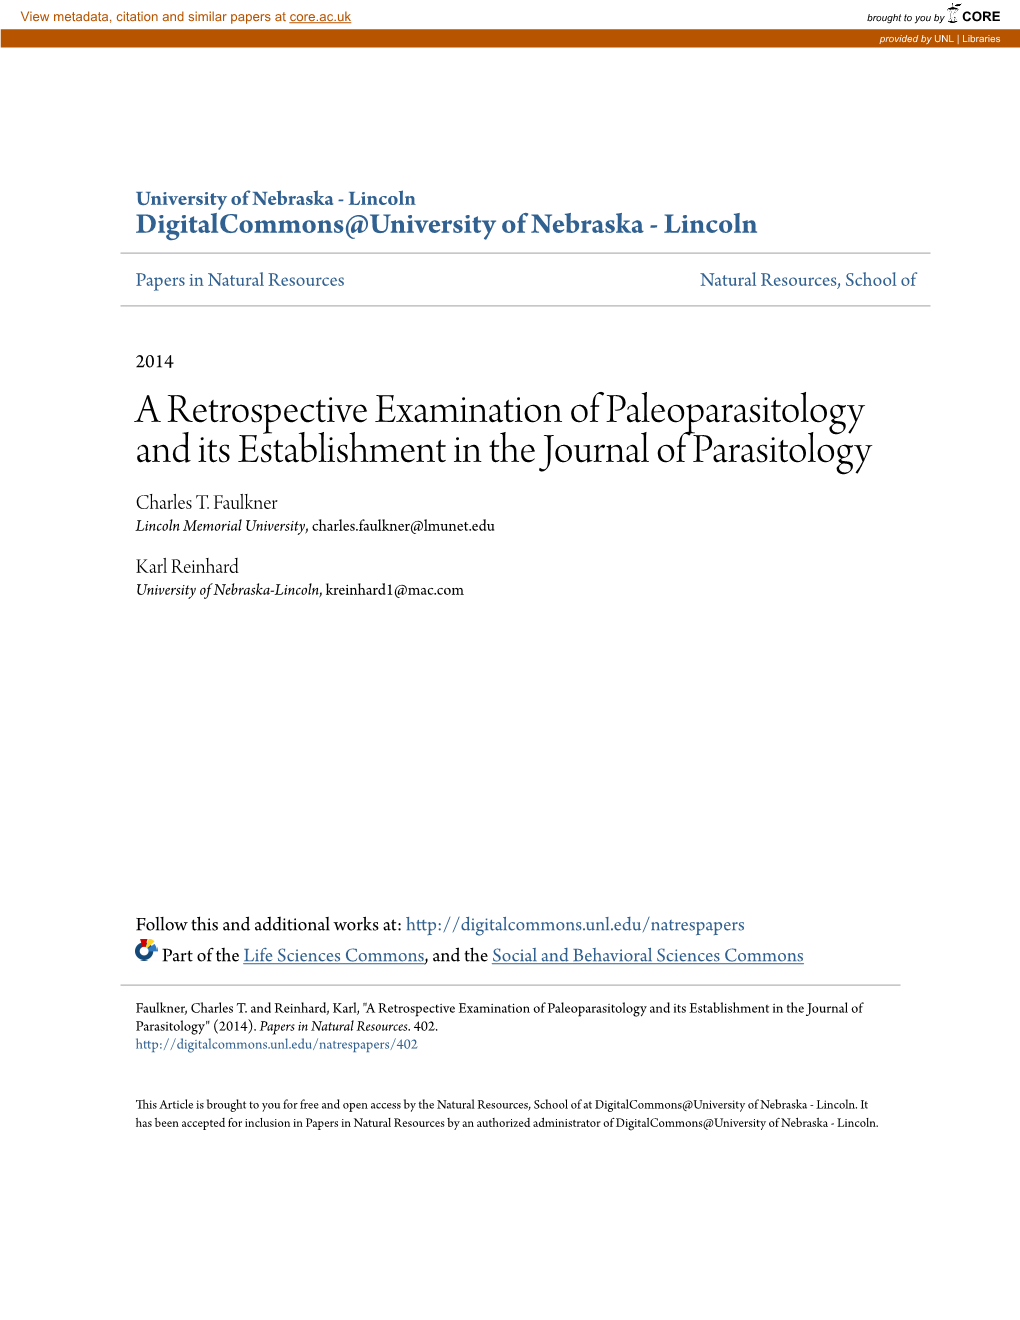 A Retrospective Examination of Paleoparasitology and Its Establishment in the Journal of Parasitology Charles T